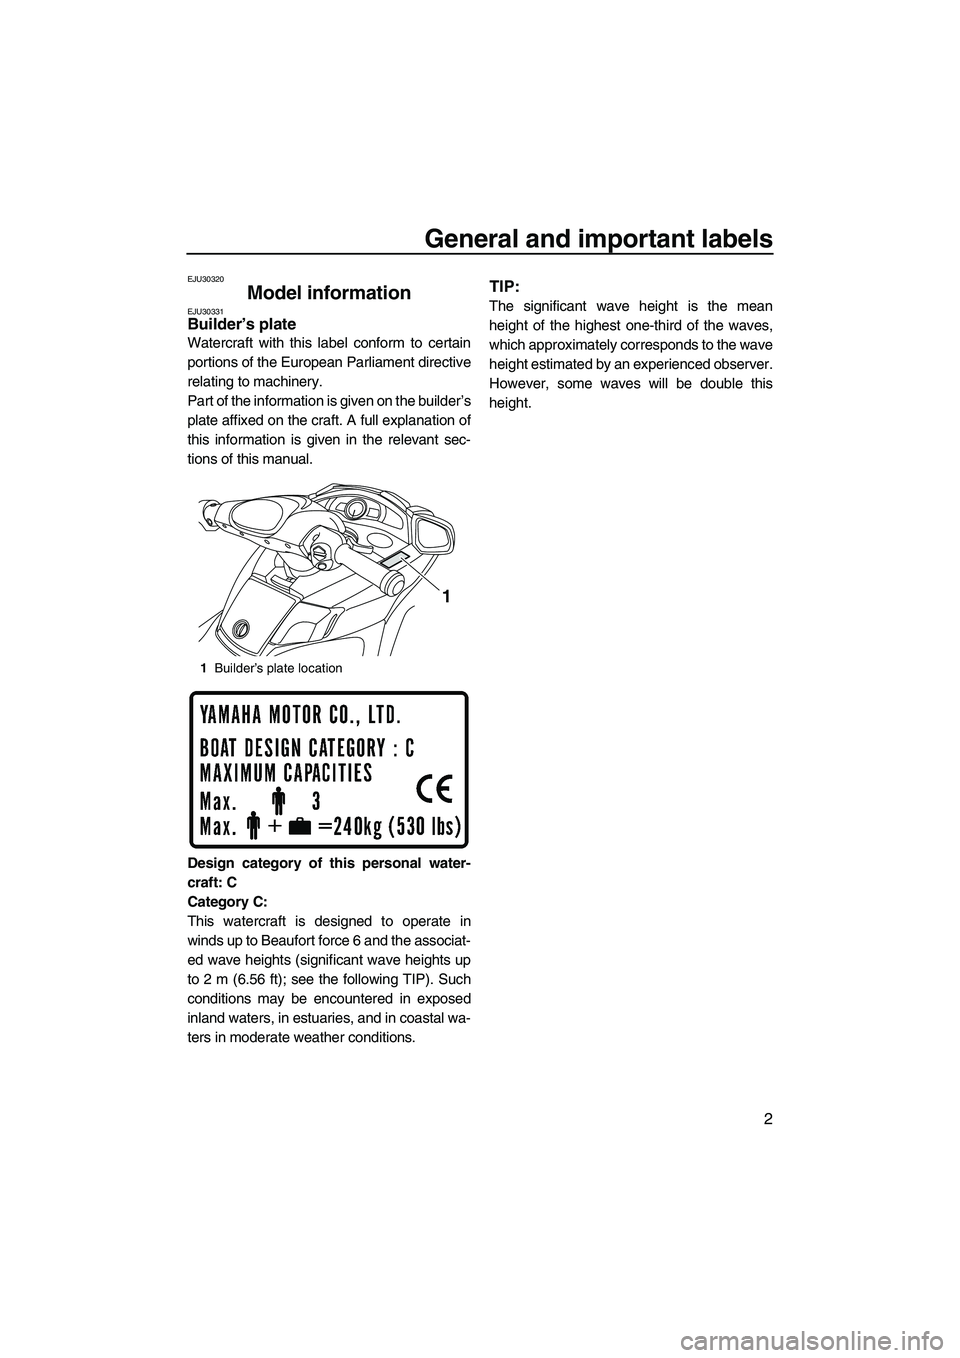 YAMAHA SVHO 2010  Owners Manual General and important labels
2
EJU30320
Model information EJU30331Builder’s plate 
Watercraft with this label conform to certain
portions of the European Parliament directive
relating to machinery.
